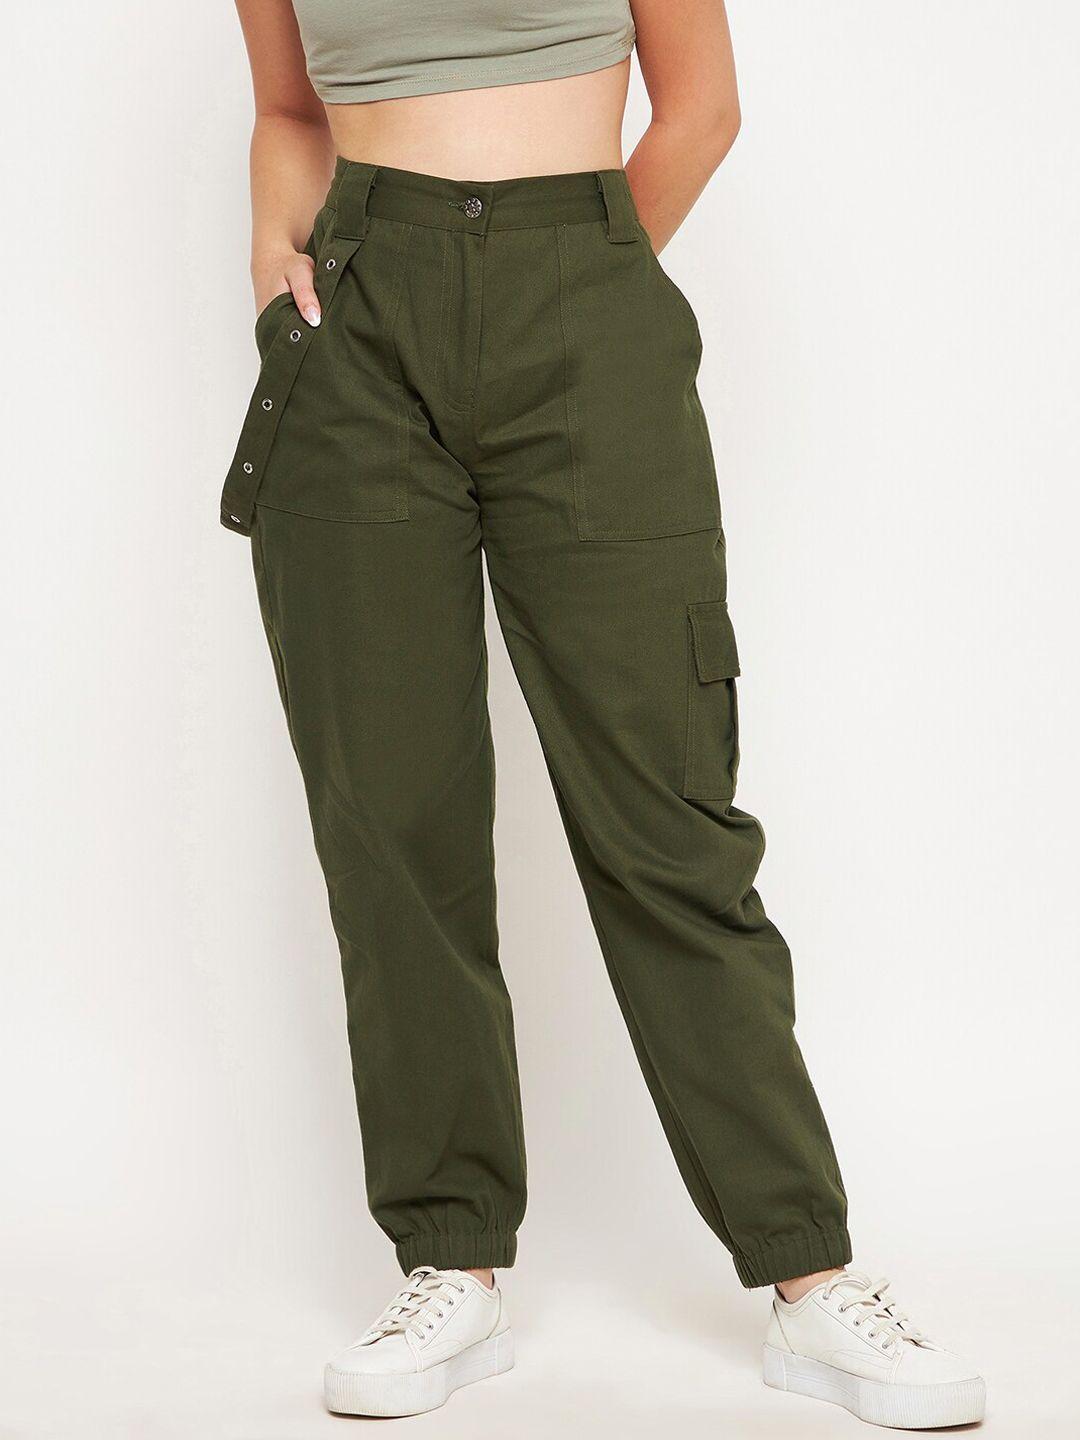 winered-women-olive-green-relaxed-high-rise-cotton-joggers